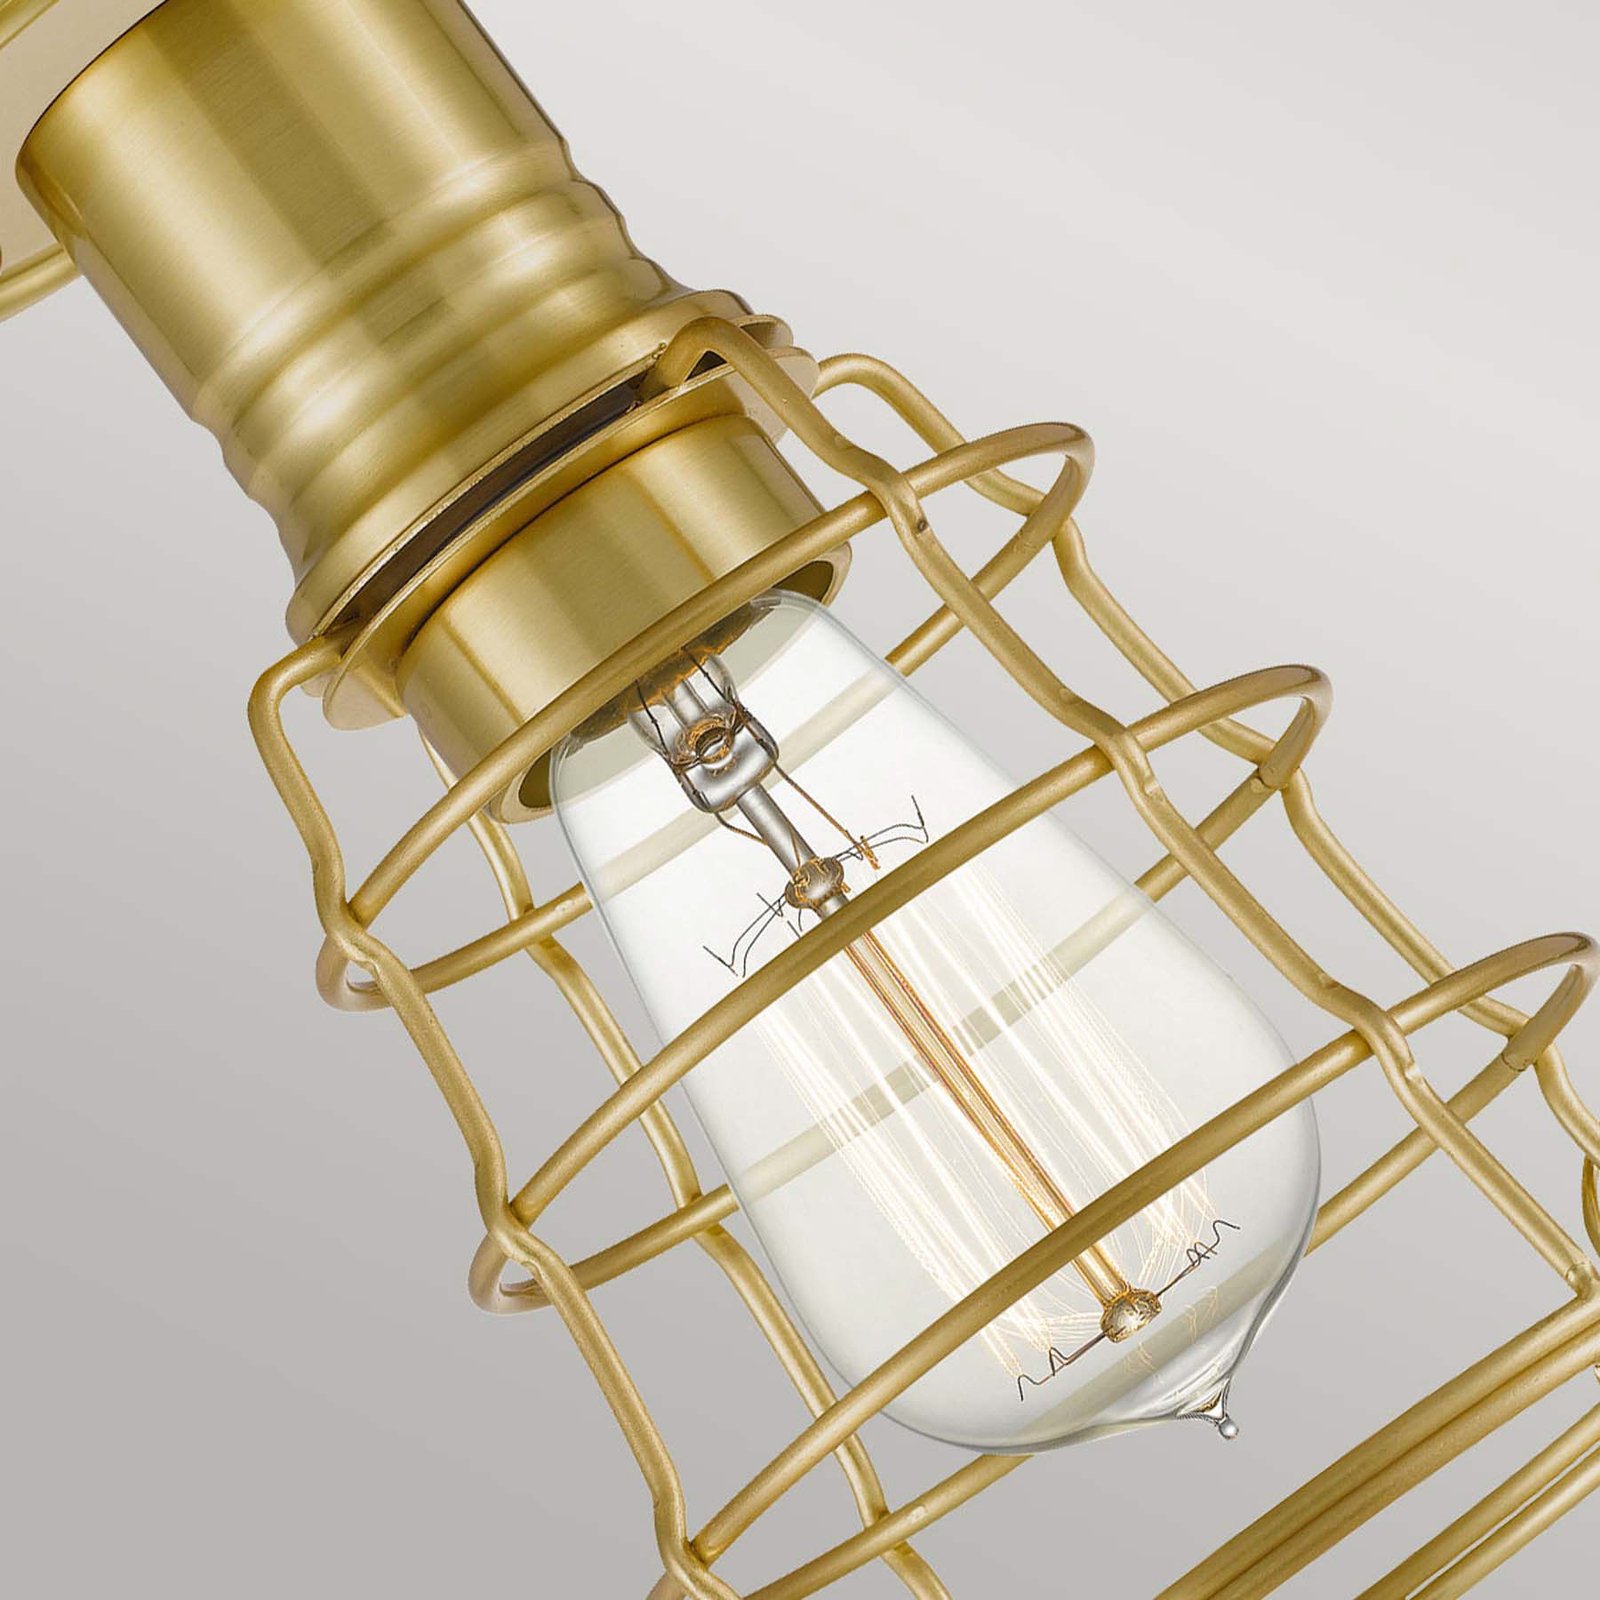 Mite ceiling light with metal cage, brushed brass